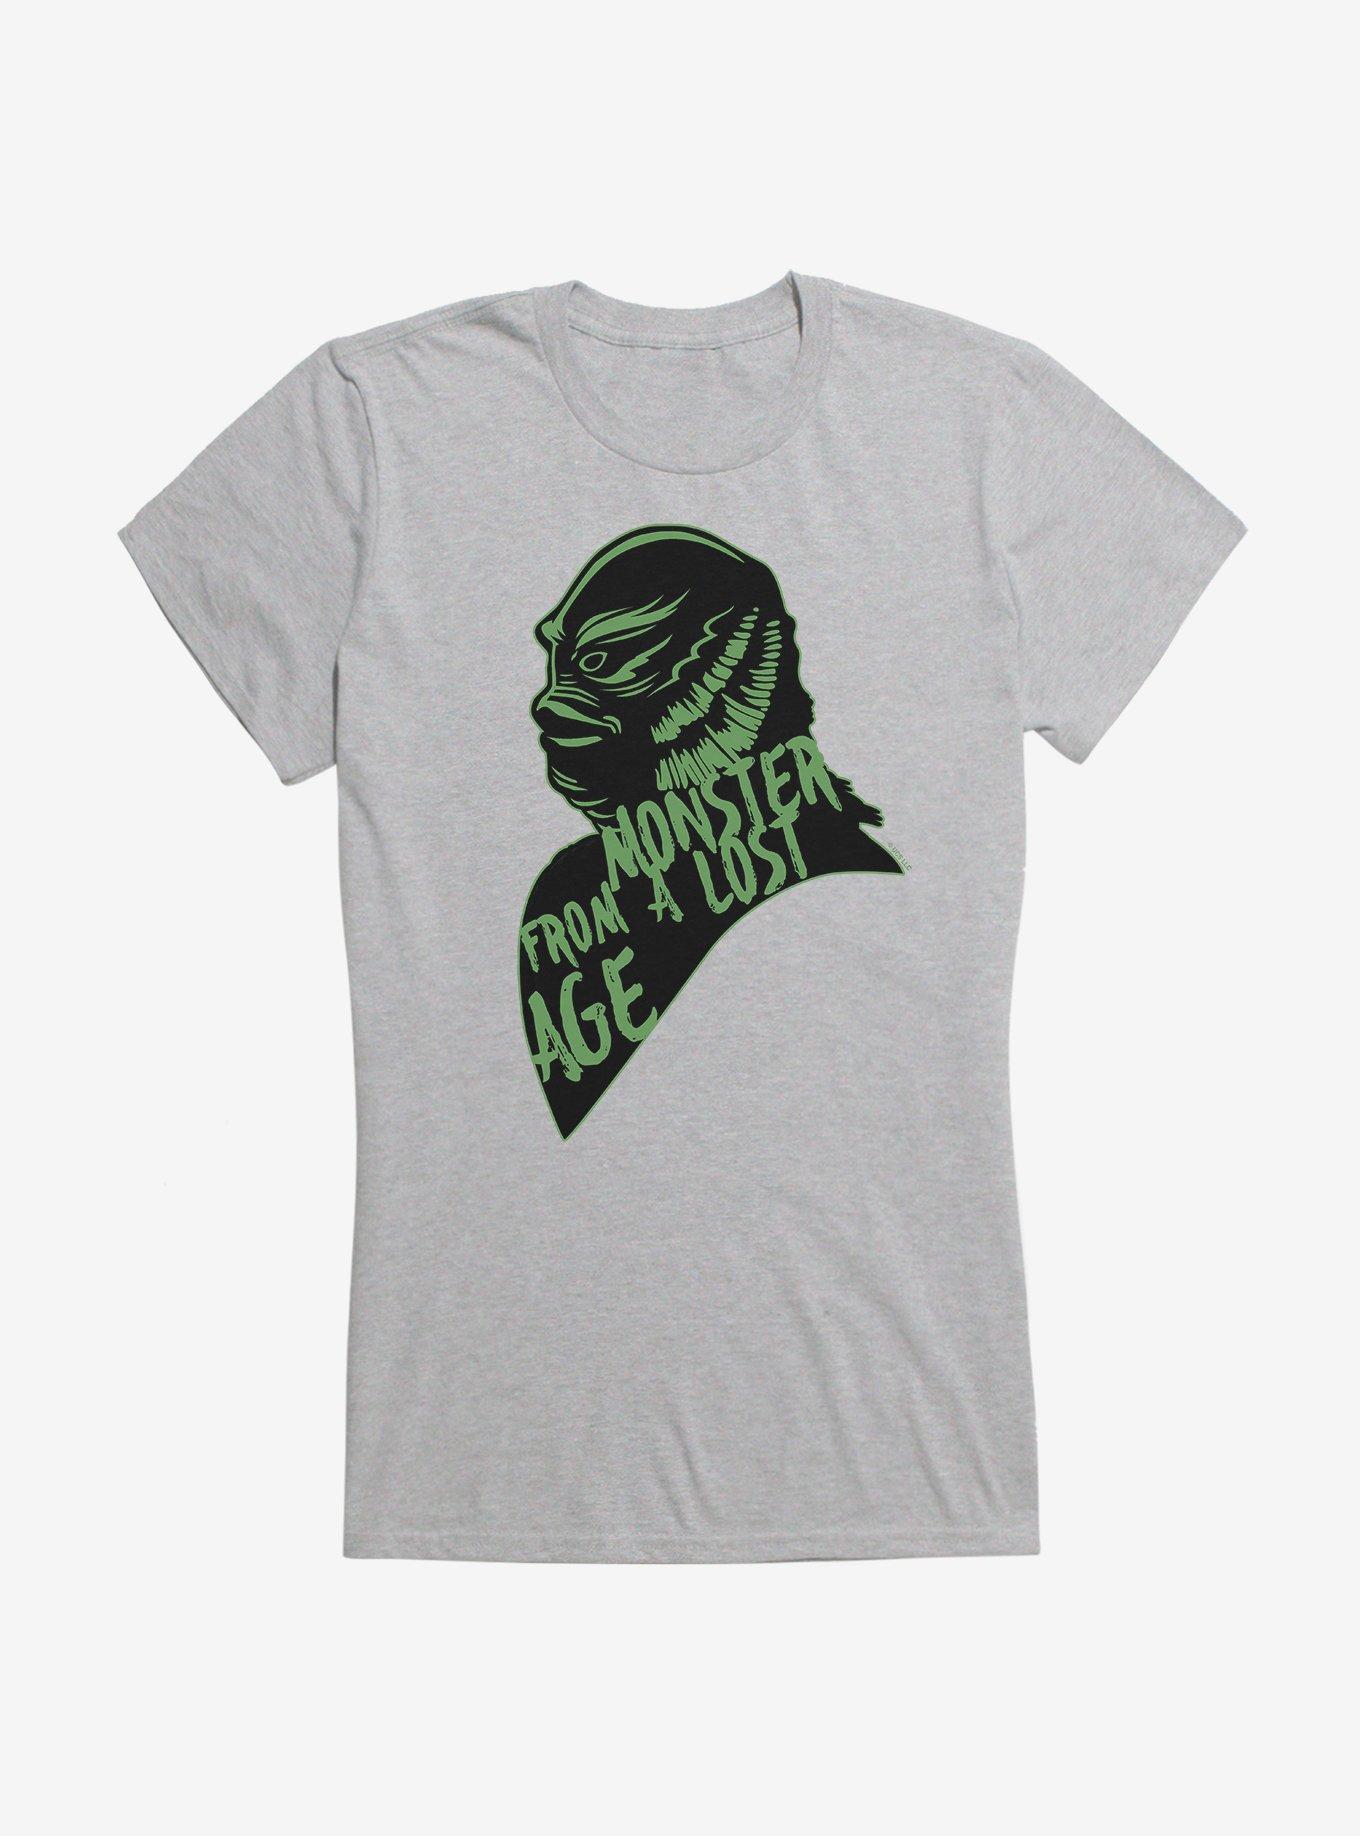 Universal Monsters Creature From The Black Lagoon Monster From a Lost Age Girls T-Shirt, HEATHER, hi-res